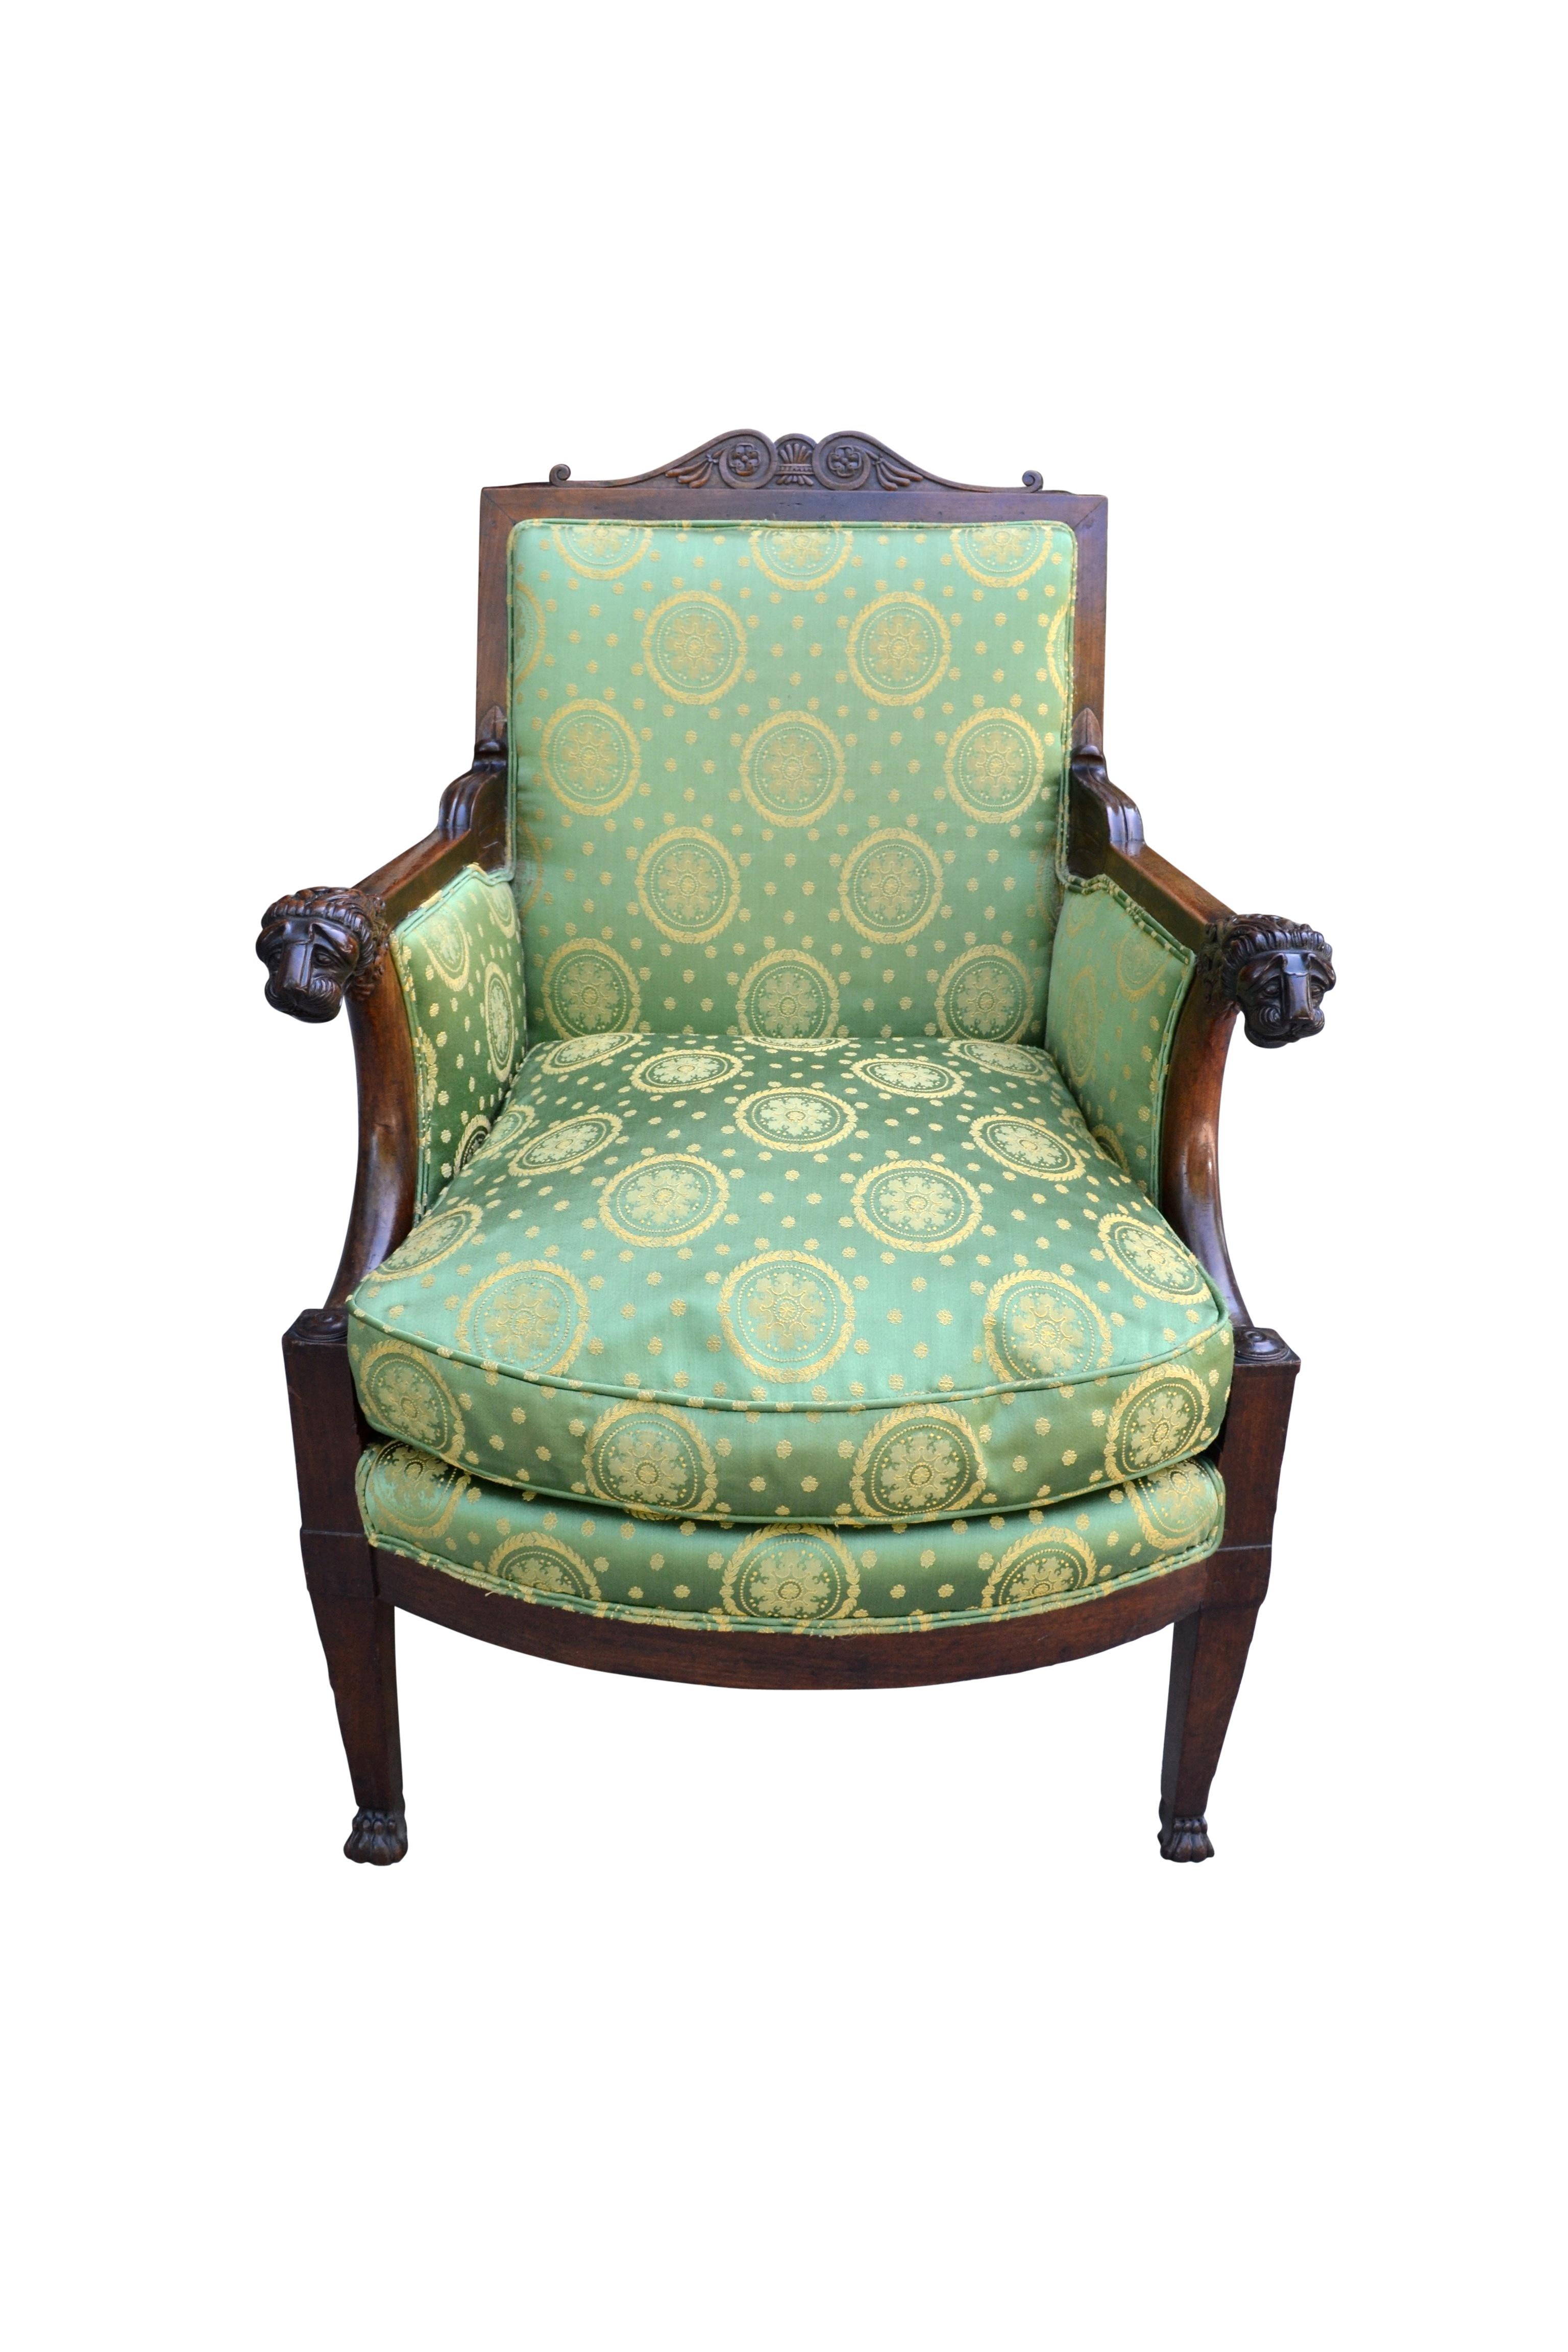 Hand-Carved Early 19th Century French Empire Mahogany Armchair For Sale